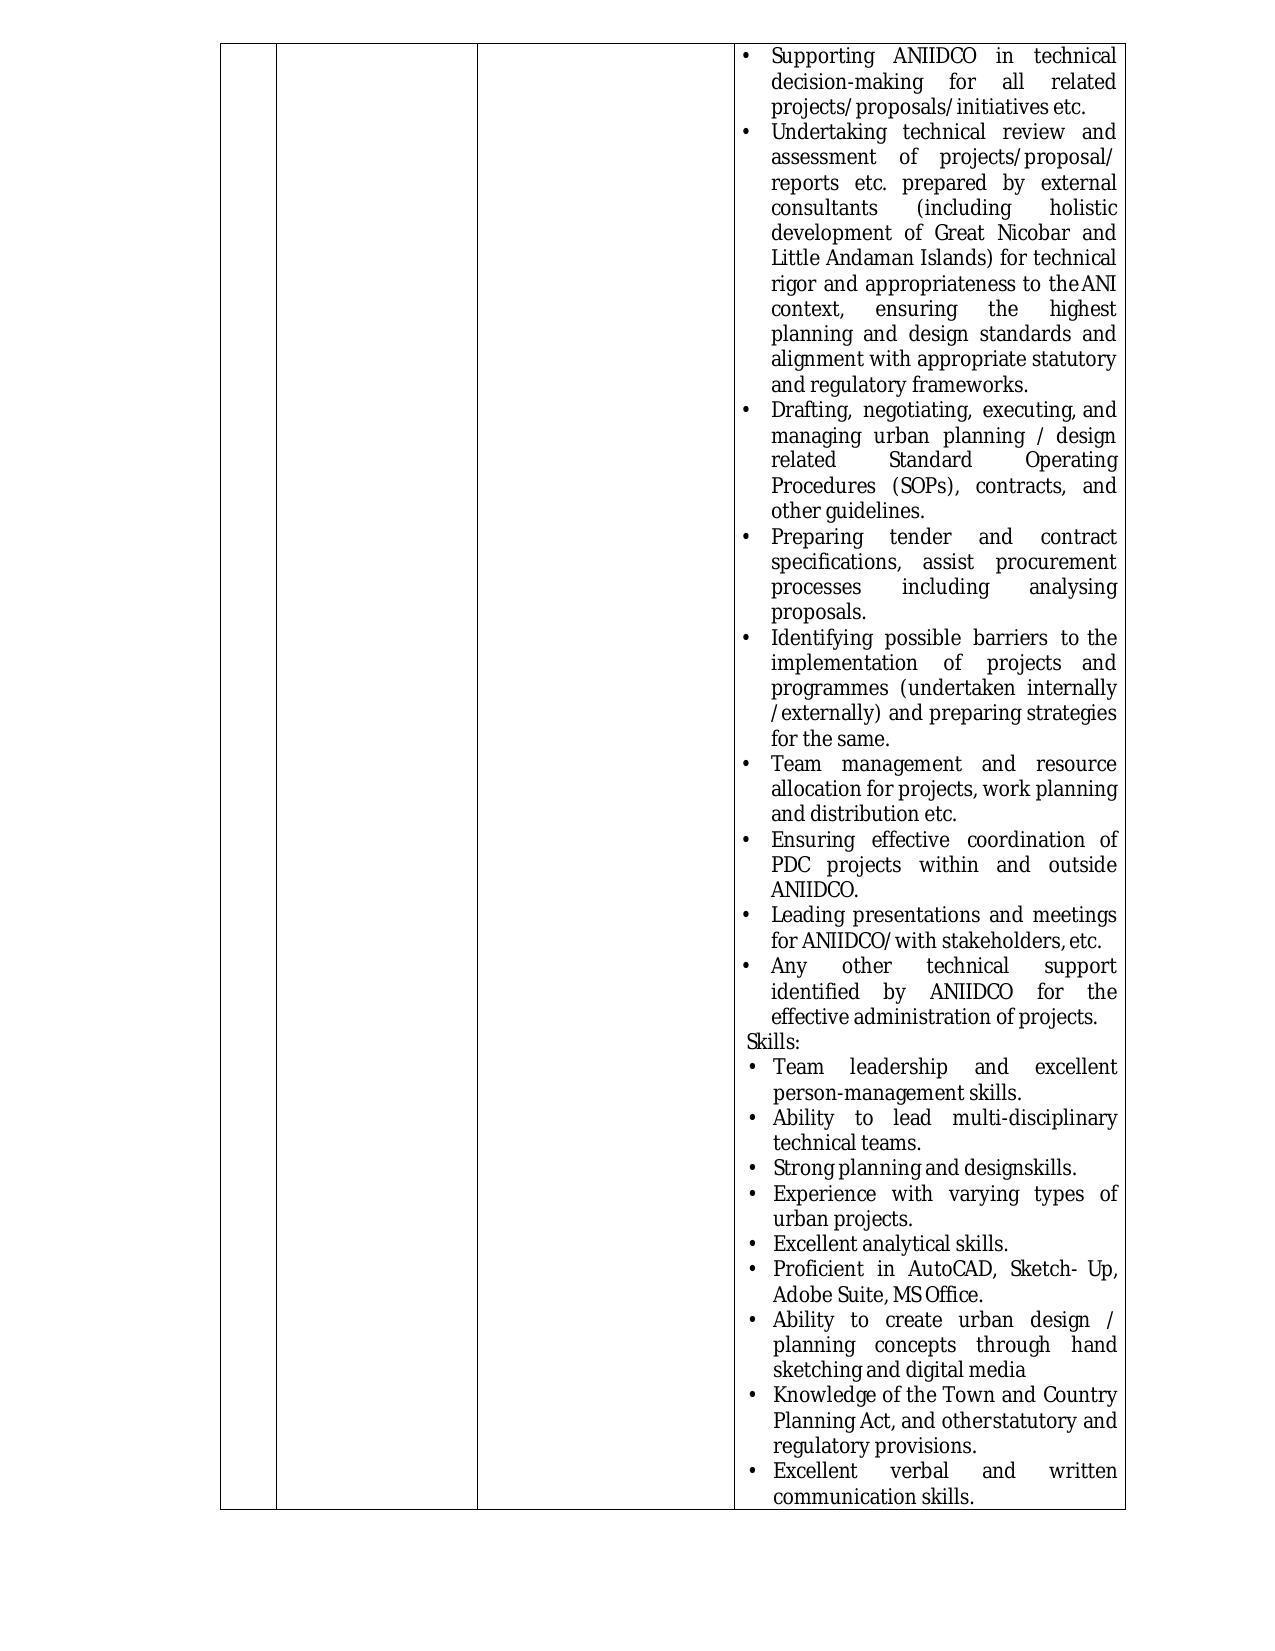 ANIIDCO Invites Application for 18 Environmental Planner, More Vacancies Recruitment 2022 - Page 14